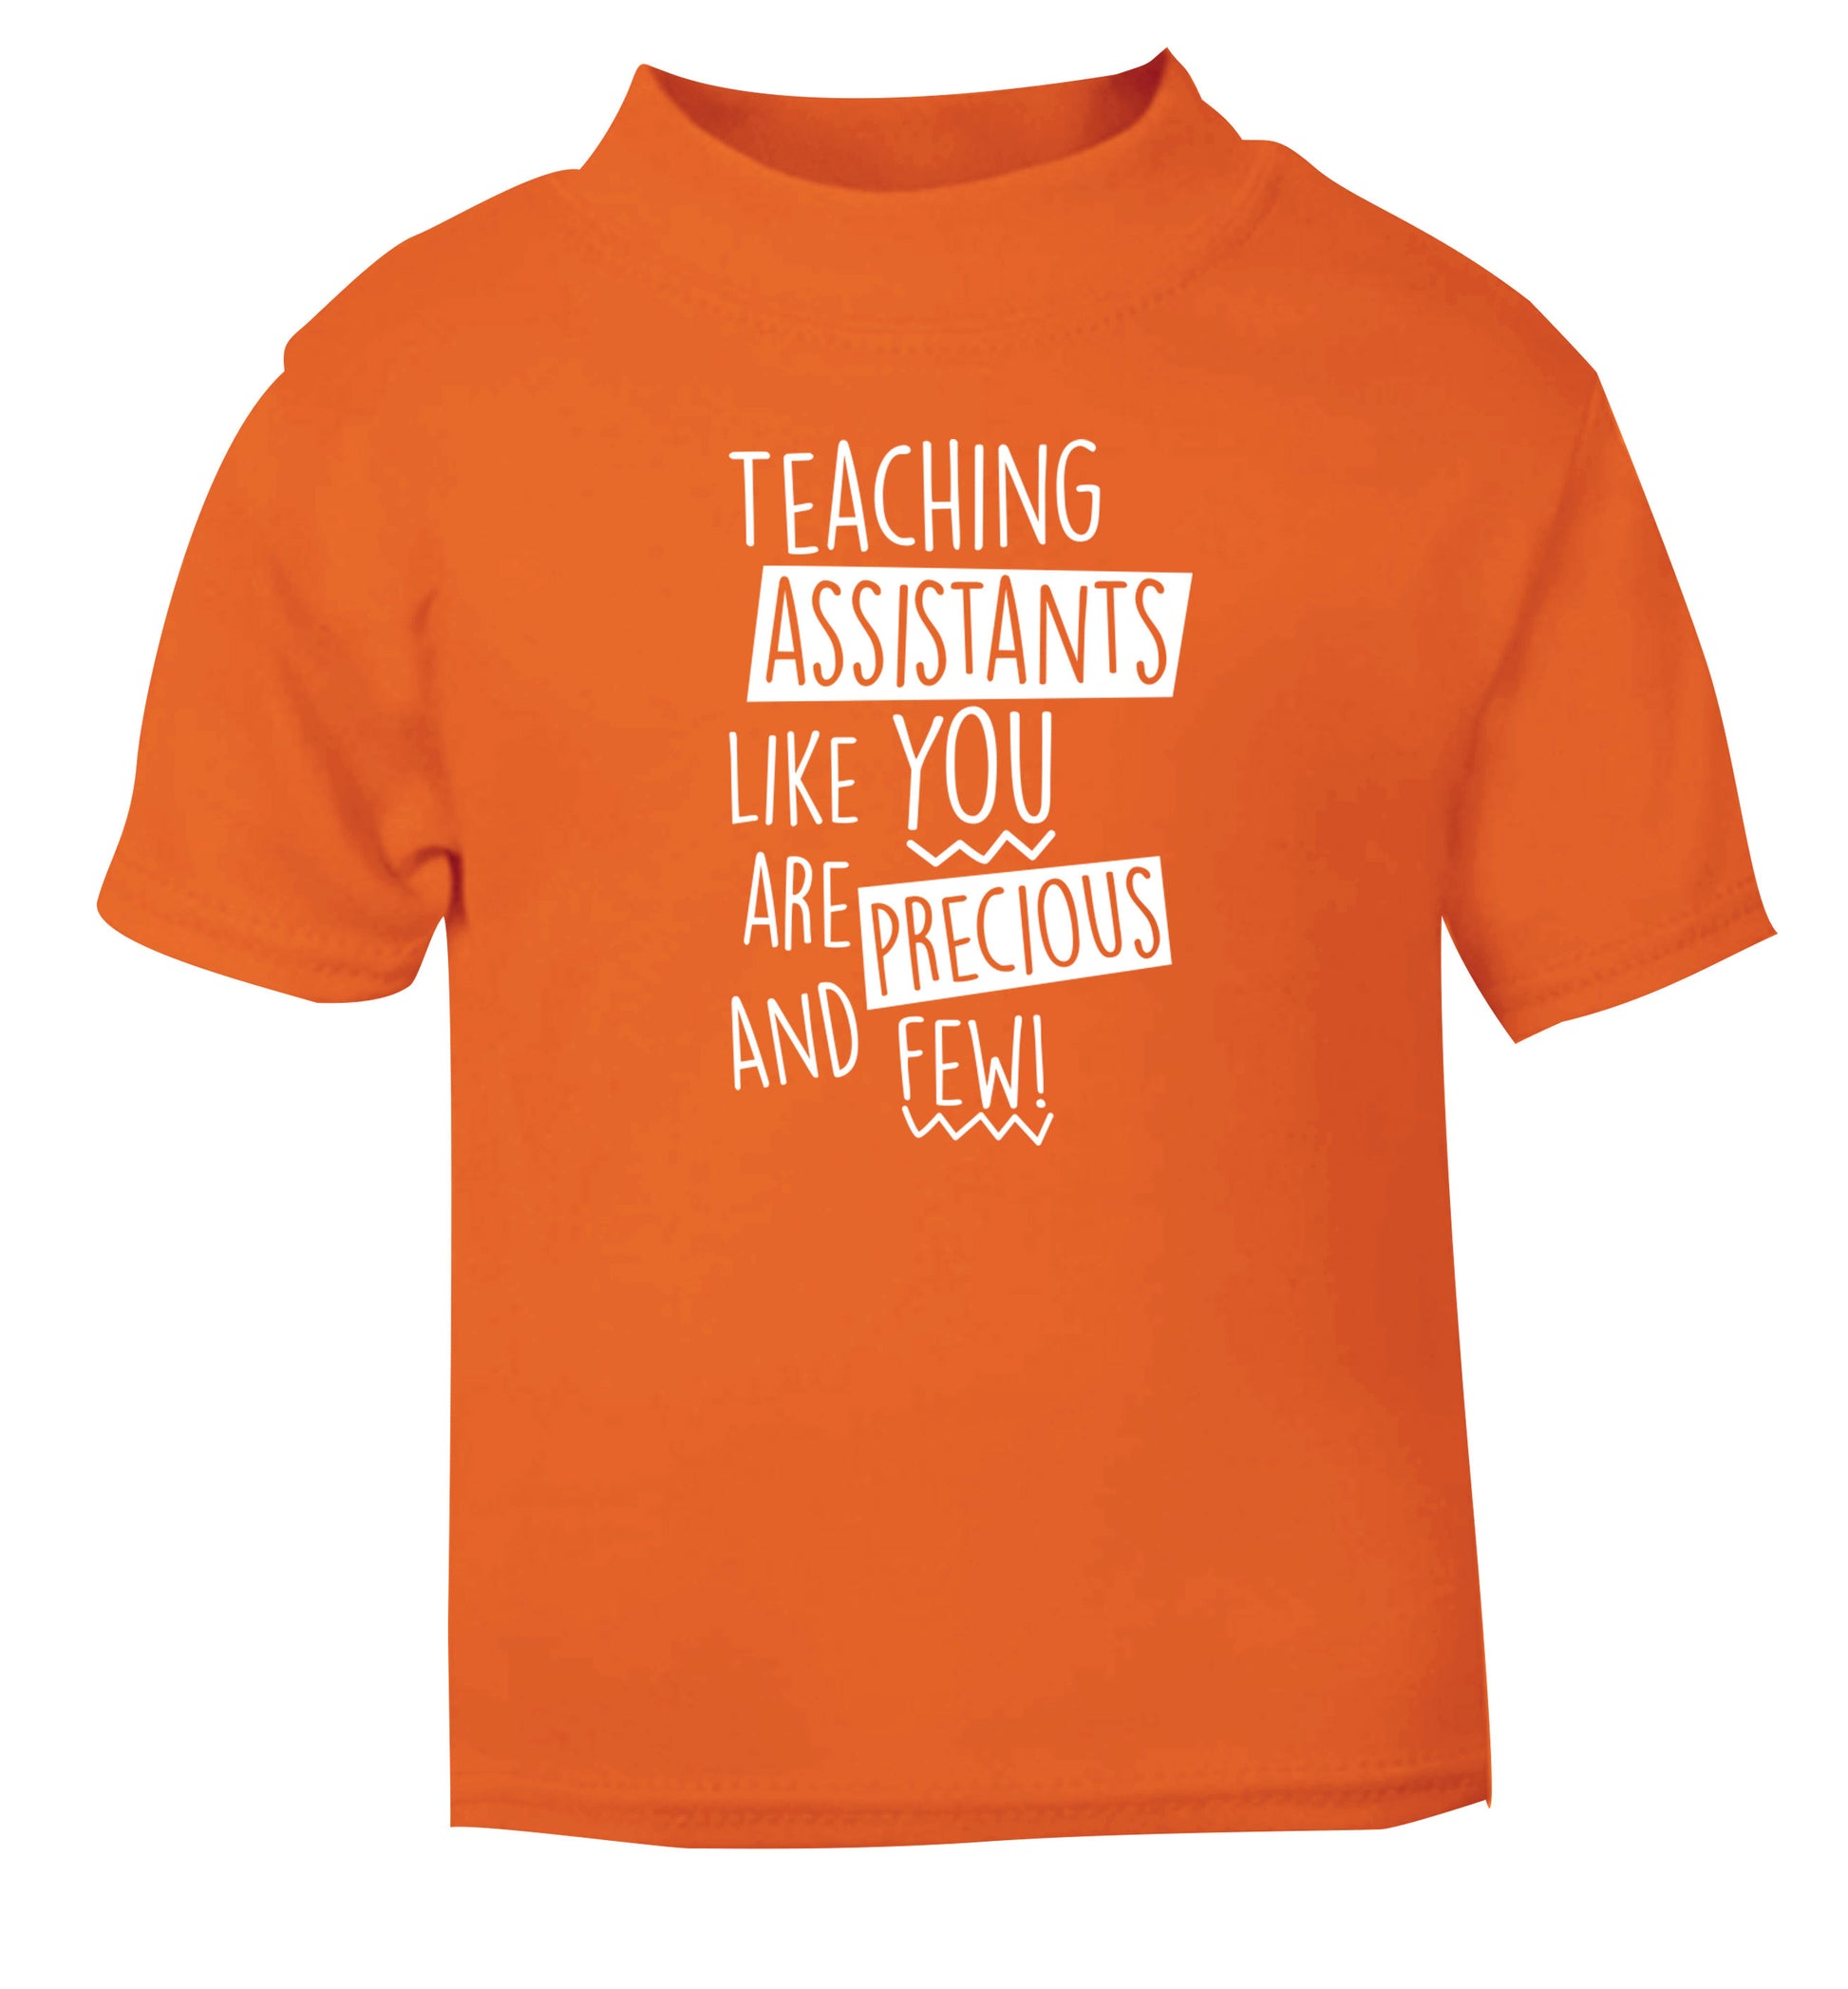 Teaching assistants like you are previous and few! orange Baby Toddler Tshirt 2 Years